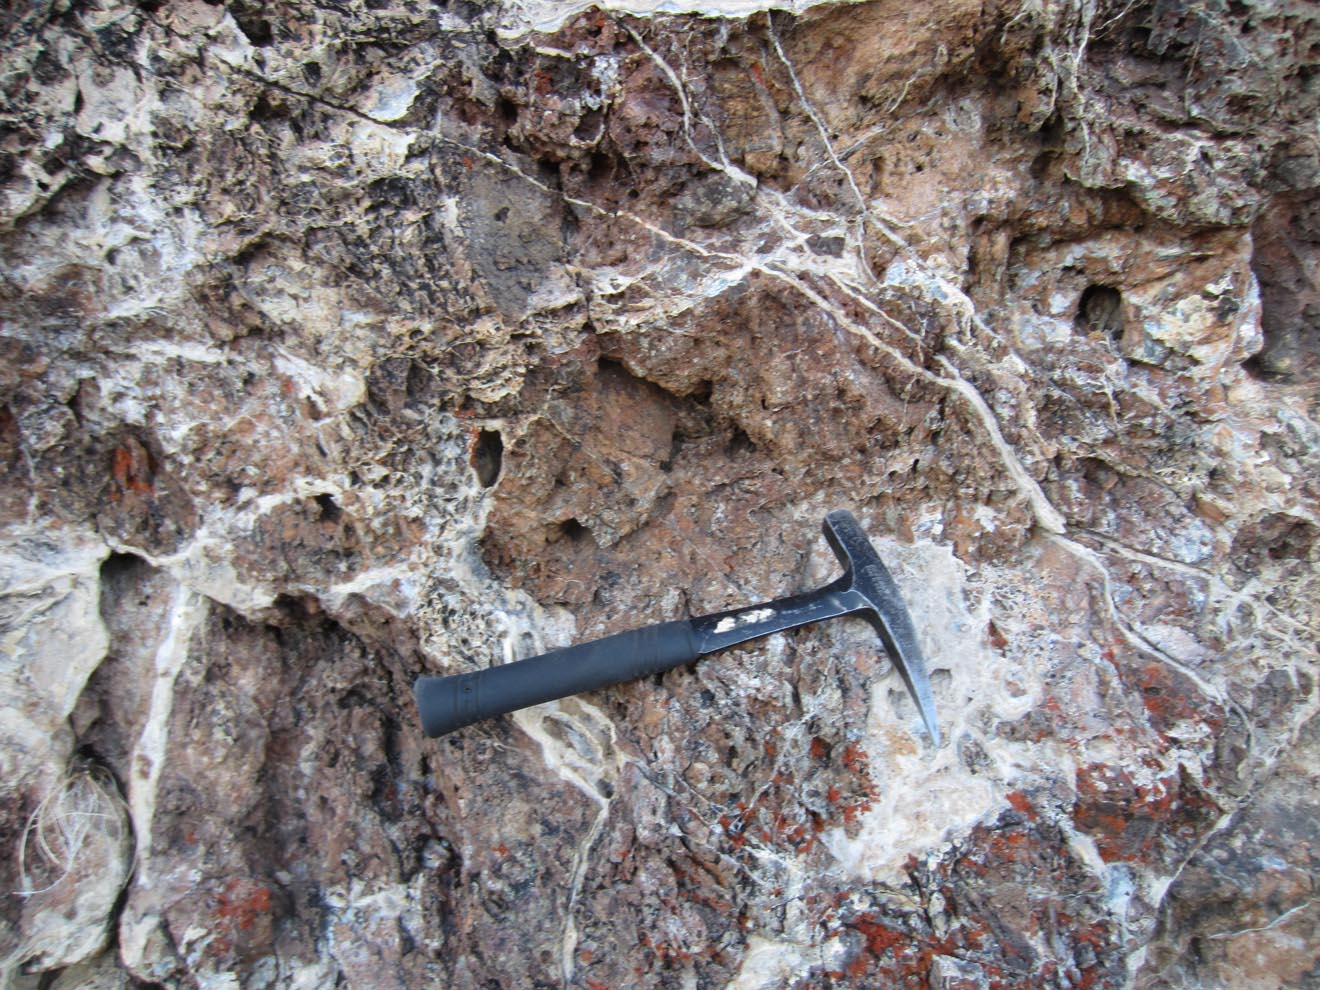 Outcrop of carbonate-altered mantle rock in the San Andreas Fault area. A recent study shows that carbon sequestration in mantle rocks may prevent large earthquakes in parts of the San Andreas Fault. (Photo by Frieder Klein, © Woods Hole Oceanographic Institution)